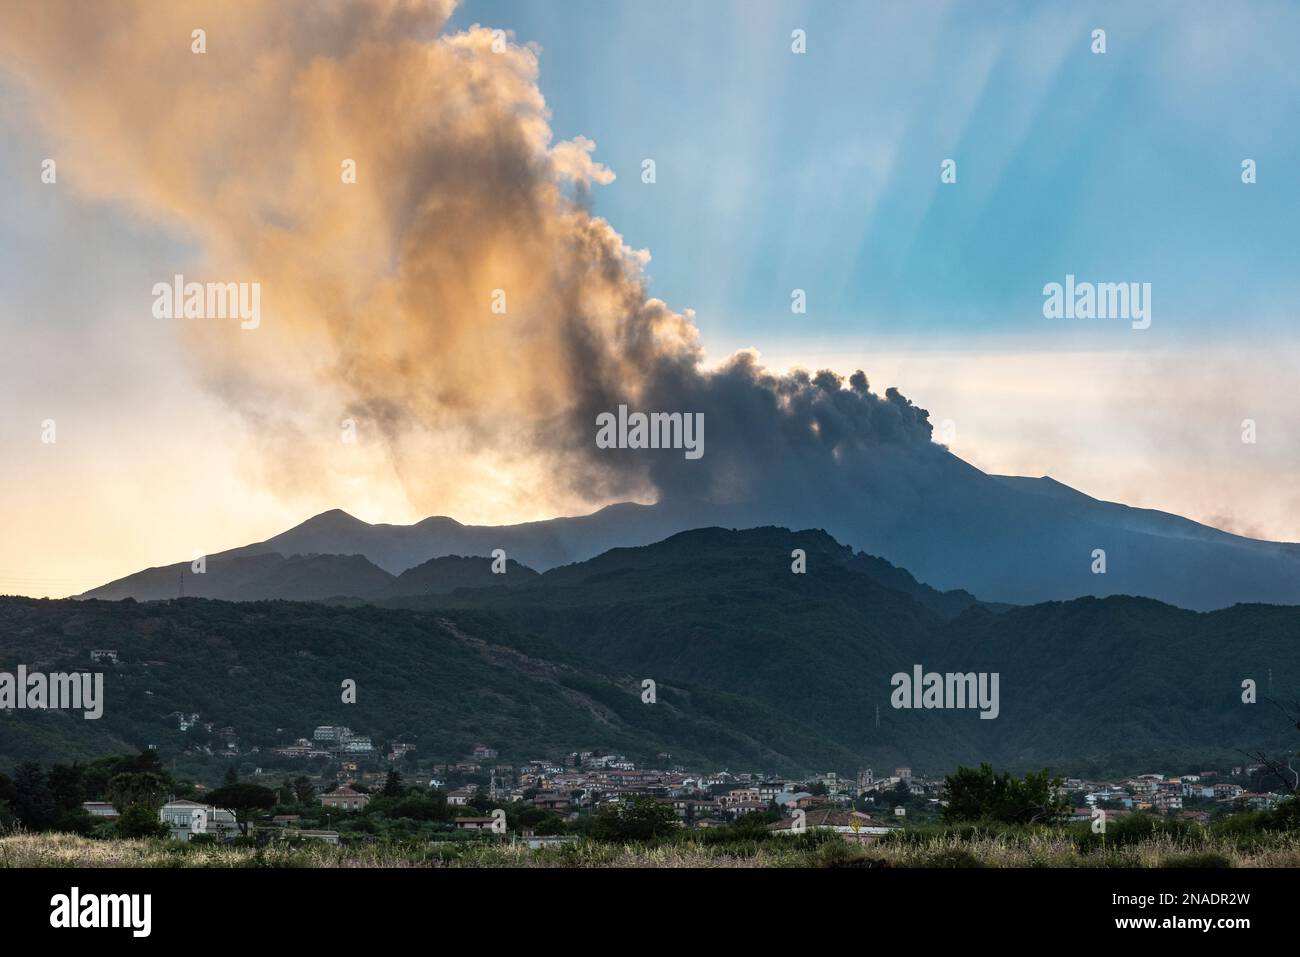 Dense clouds of volcanic ash being emitted from craters on Mount Etna, Sicily, which towers above the town of Zafferana Etnea in the foreground Stock Photo